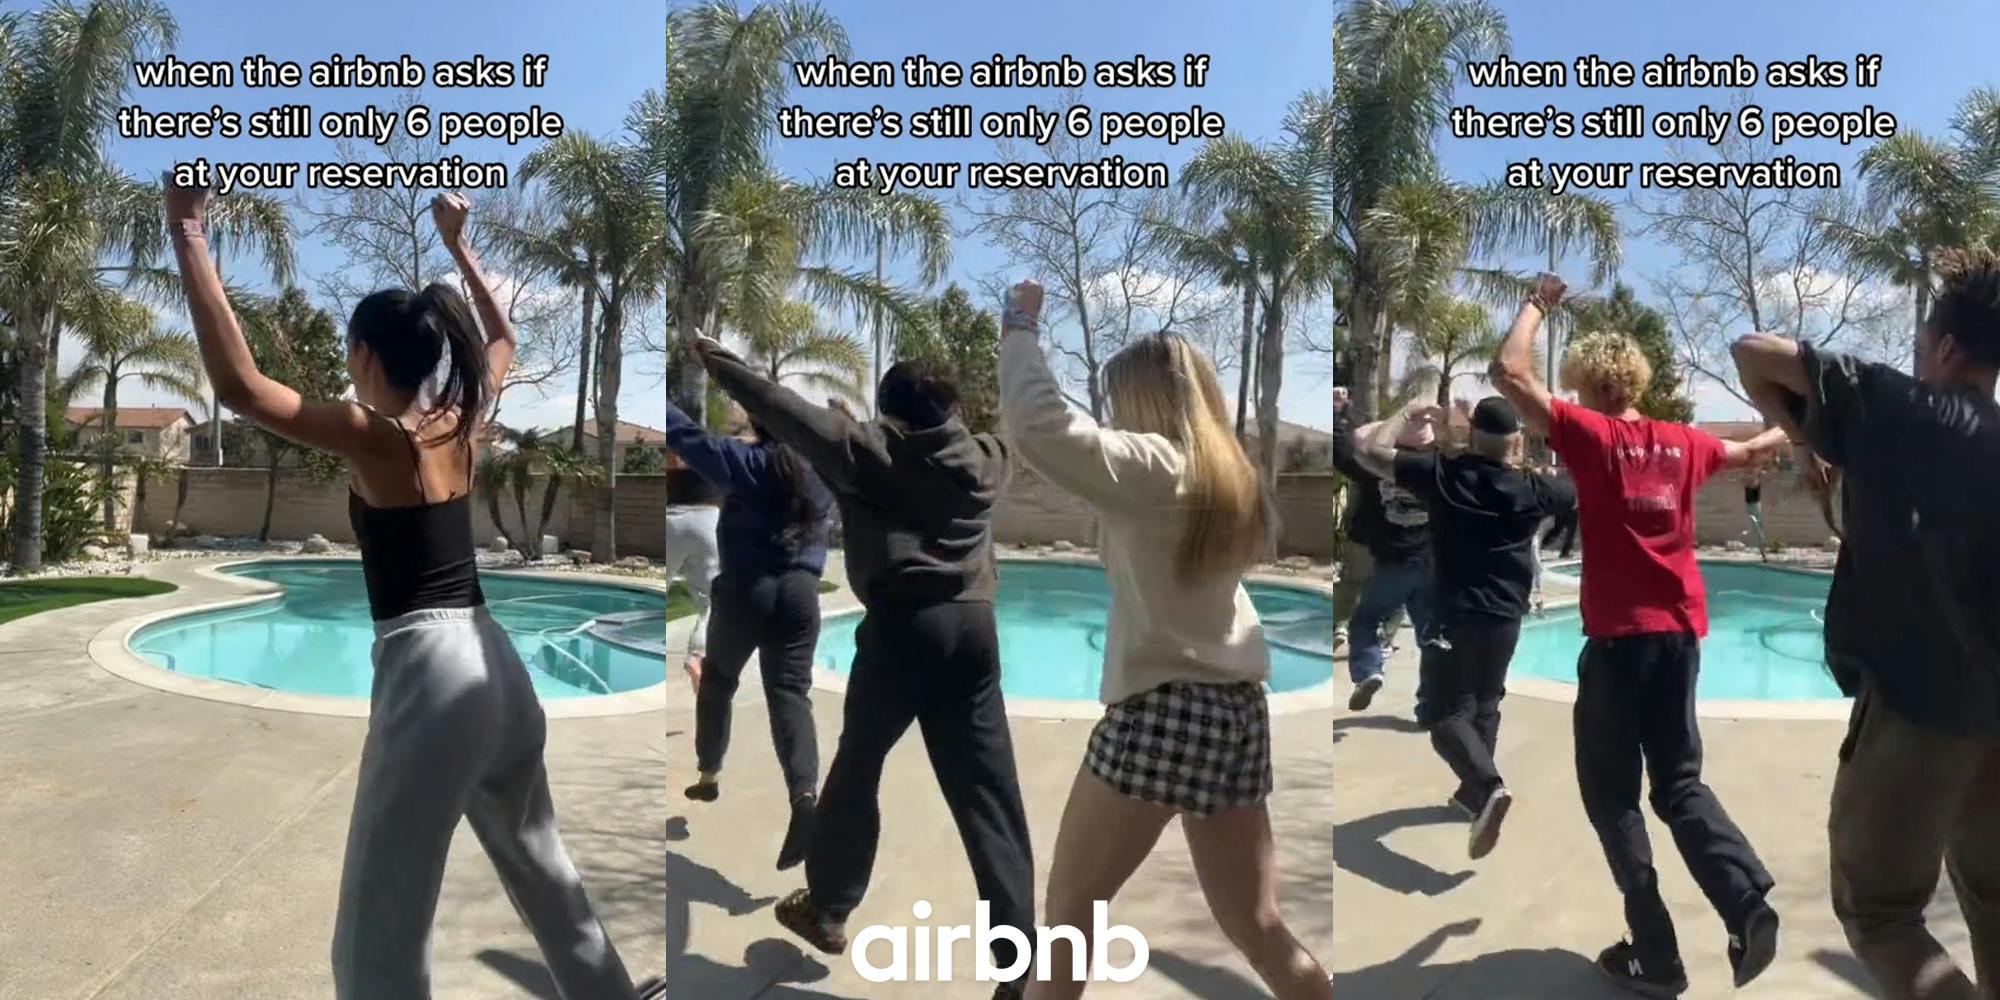 Airbnb guest running outside at pool with caption "when the airbnb asks if there's still only 6 people at your reservation" (l) Airbnb guests running outside at pool with caption "when the airbnb asks if there's still only 6 people at your reservation" with Airbnb logo at bottom (c) Airbnb guests running outside at pool with caption "when the airbnb asks if there's still only 6 people at your reservation" (r)